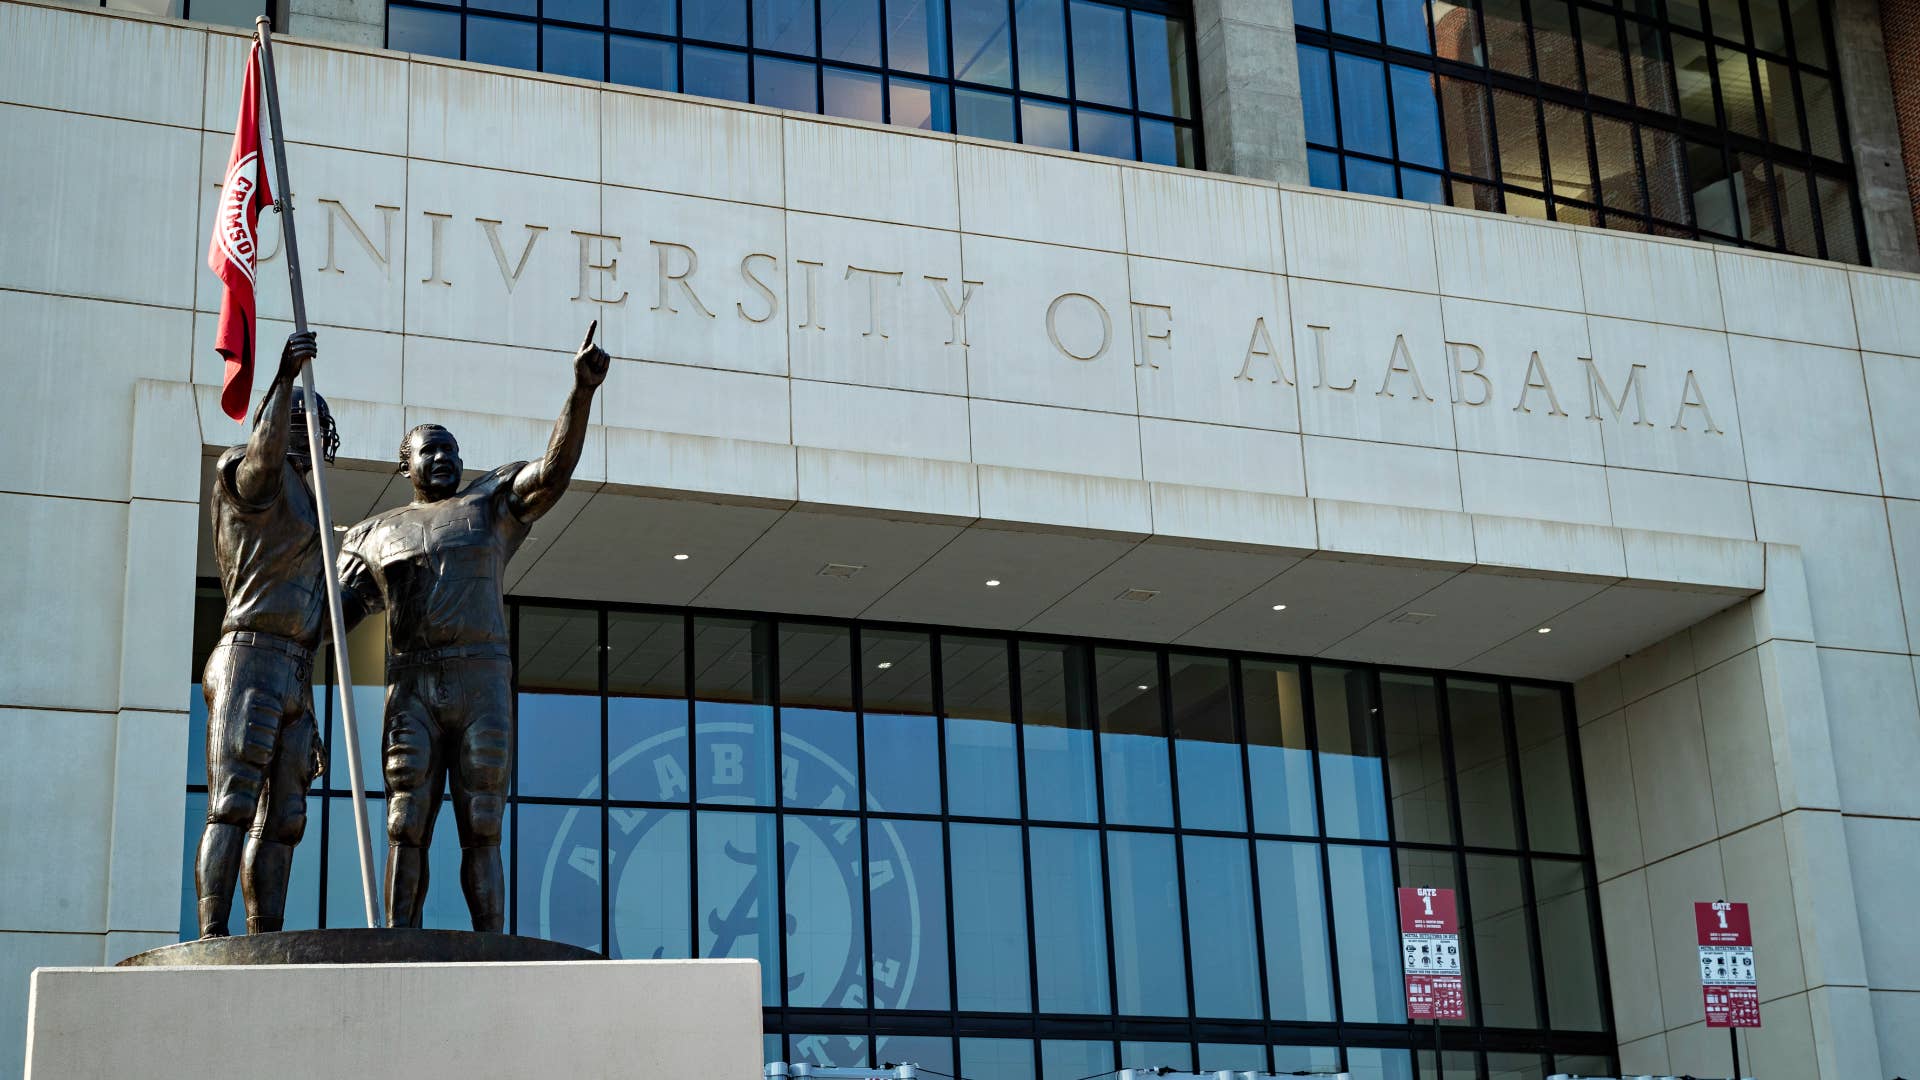 A part of the University of Alabama campus is pictured